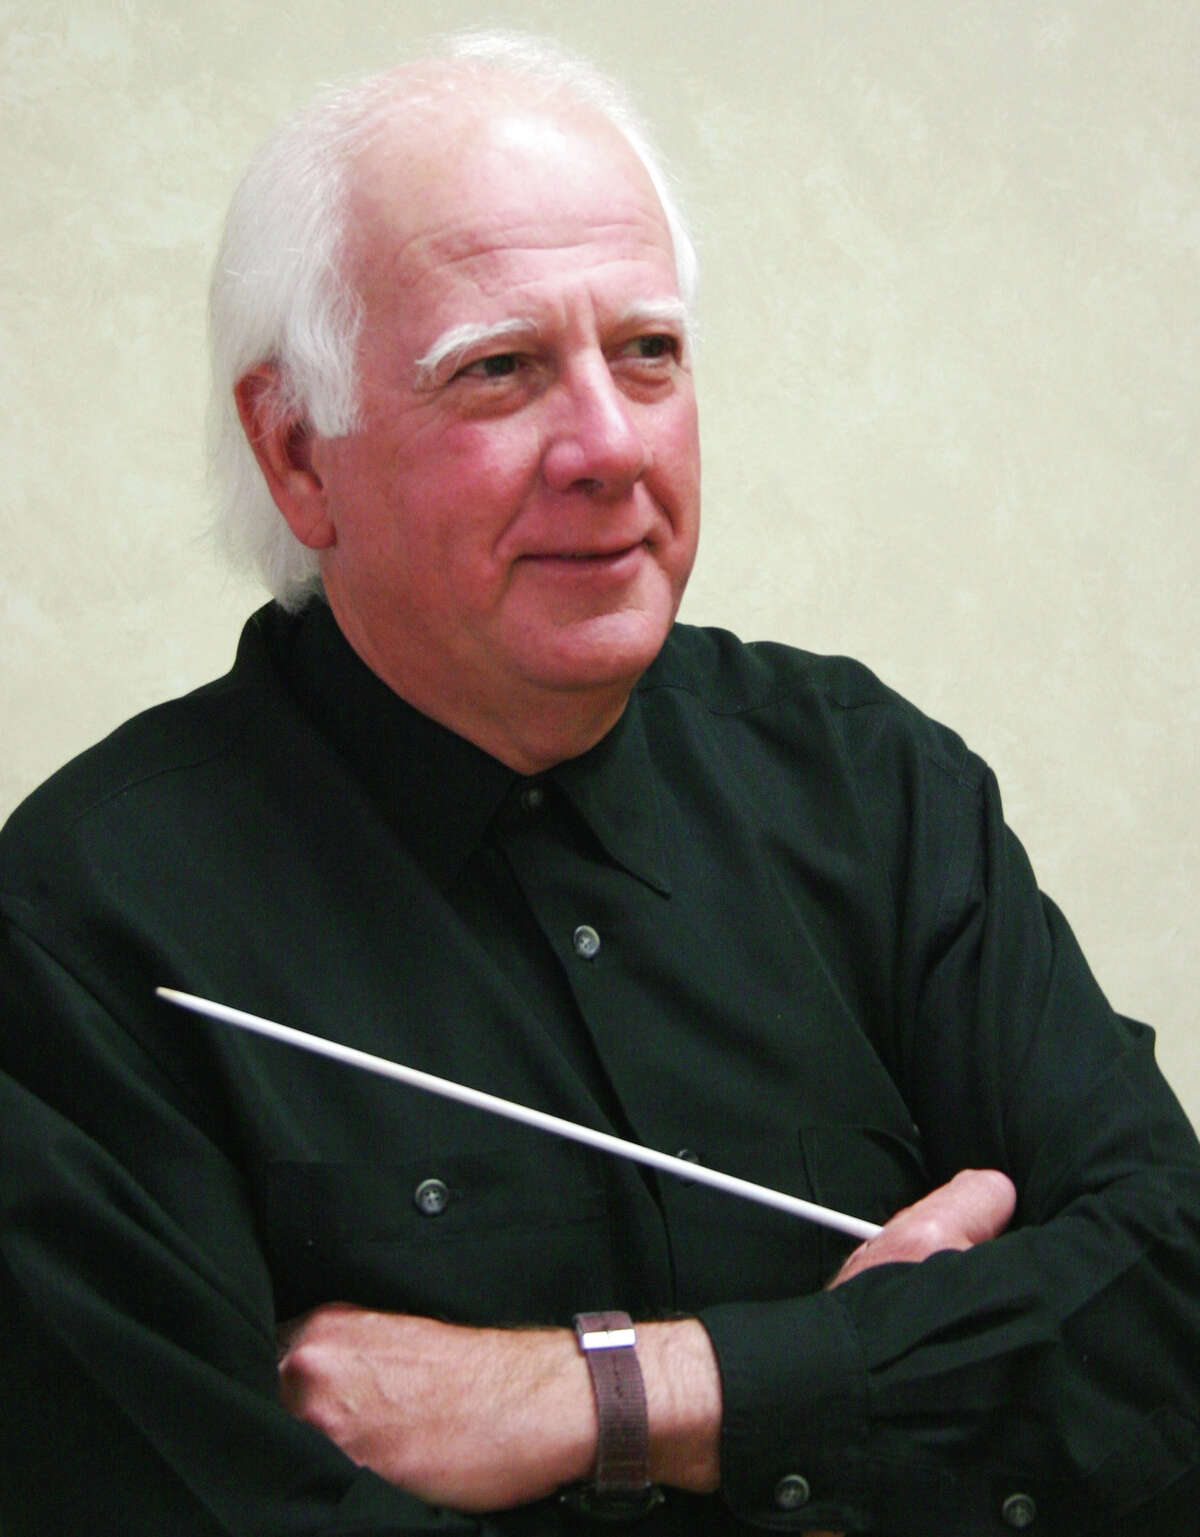 Dr. Don Hutson, music director and conductor of the Conroe Symphony Orchestra, will lead the musicians in a family-friendly performance of the classics on the final day of the Rising Stars & Legends celebration in Conroe on April 21 and 22.